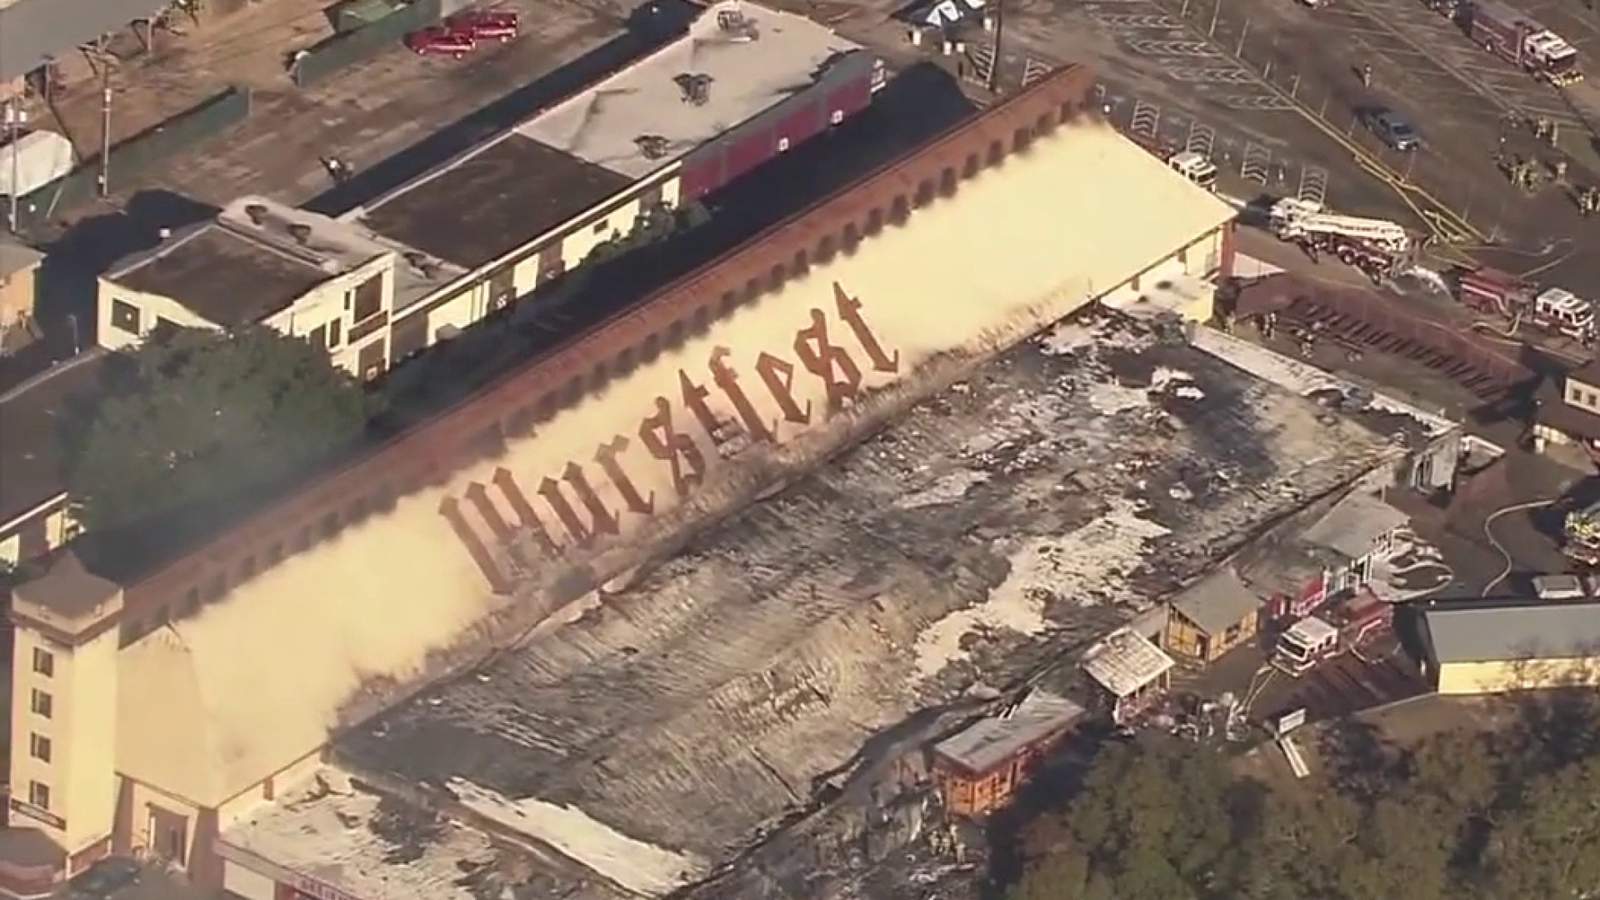 Marktplatz building a ‘total loss’ after fire at Wurstfest grounds in New Braunfels, official says